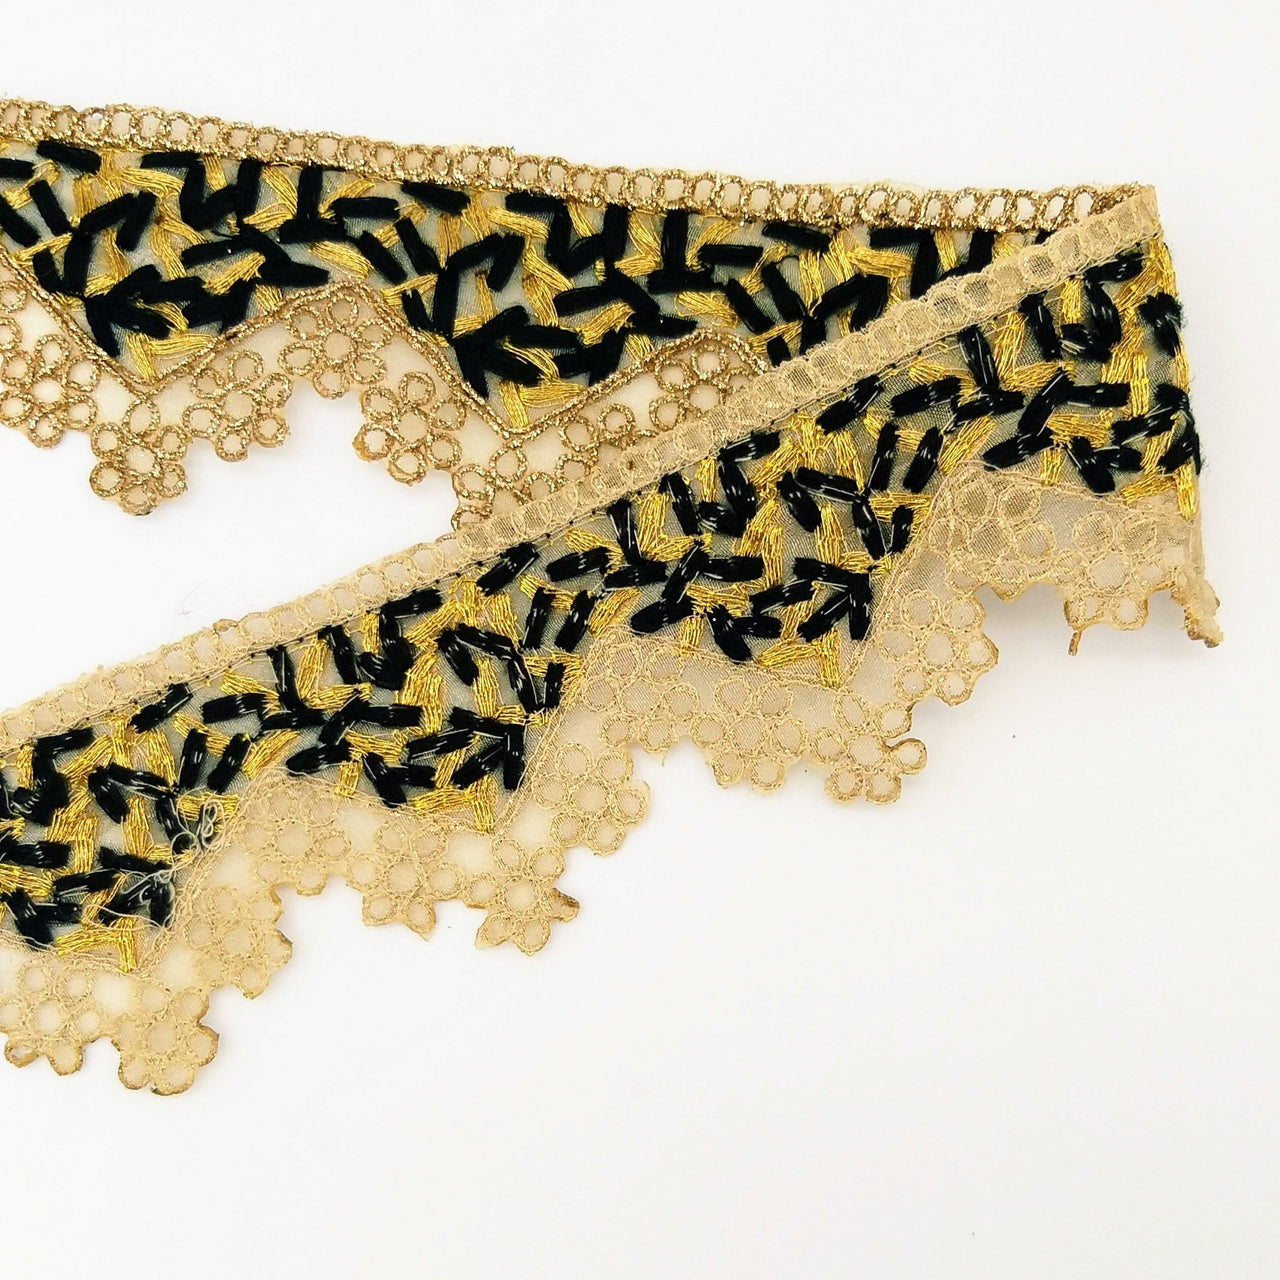 Gold Sheer Tissue Fabric Cutwork Trim with Embroidery in Gold and Black, Scallop Trim, Fringe Trim